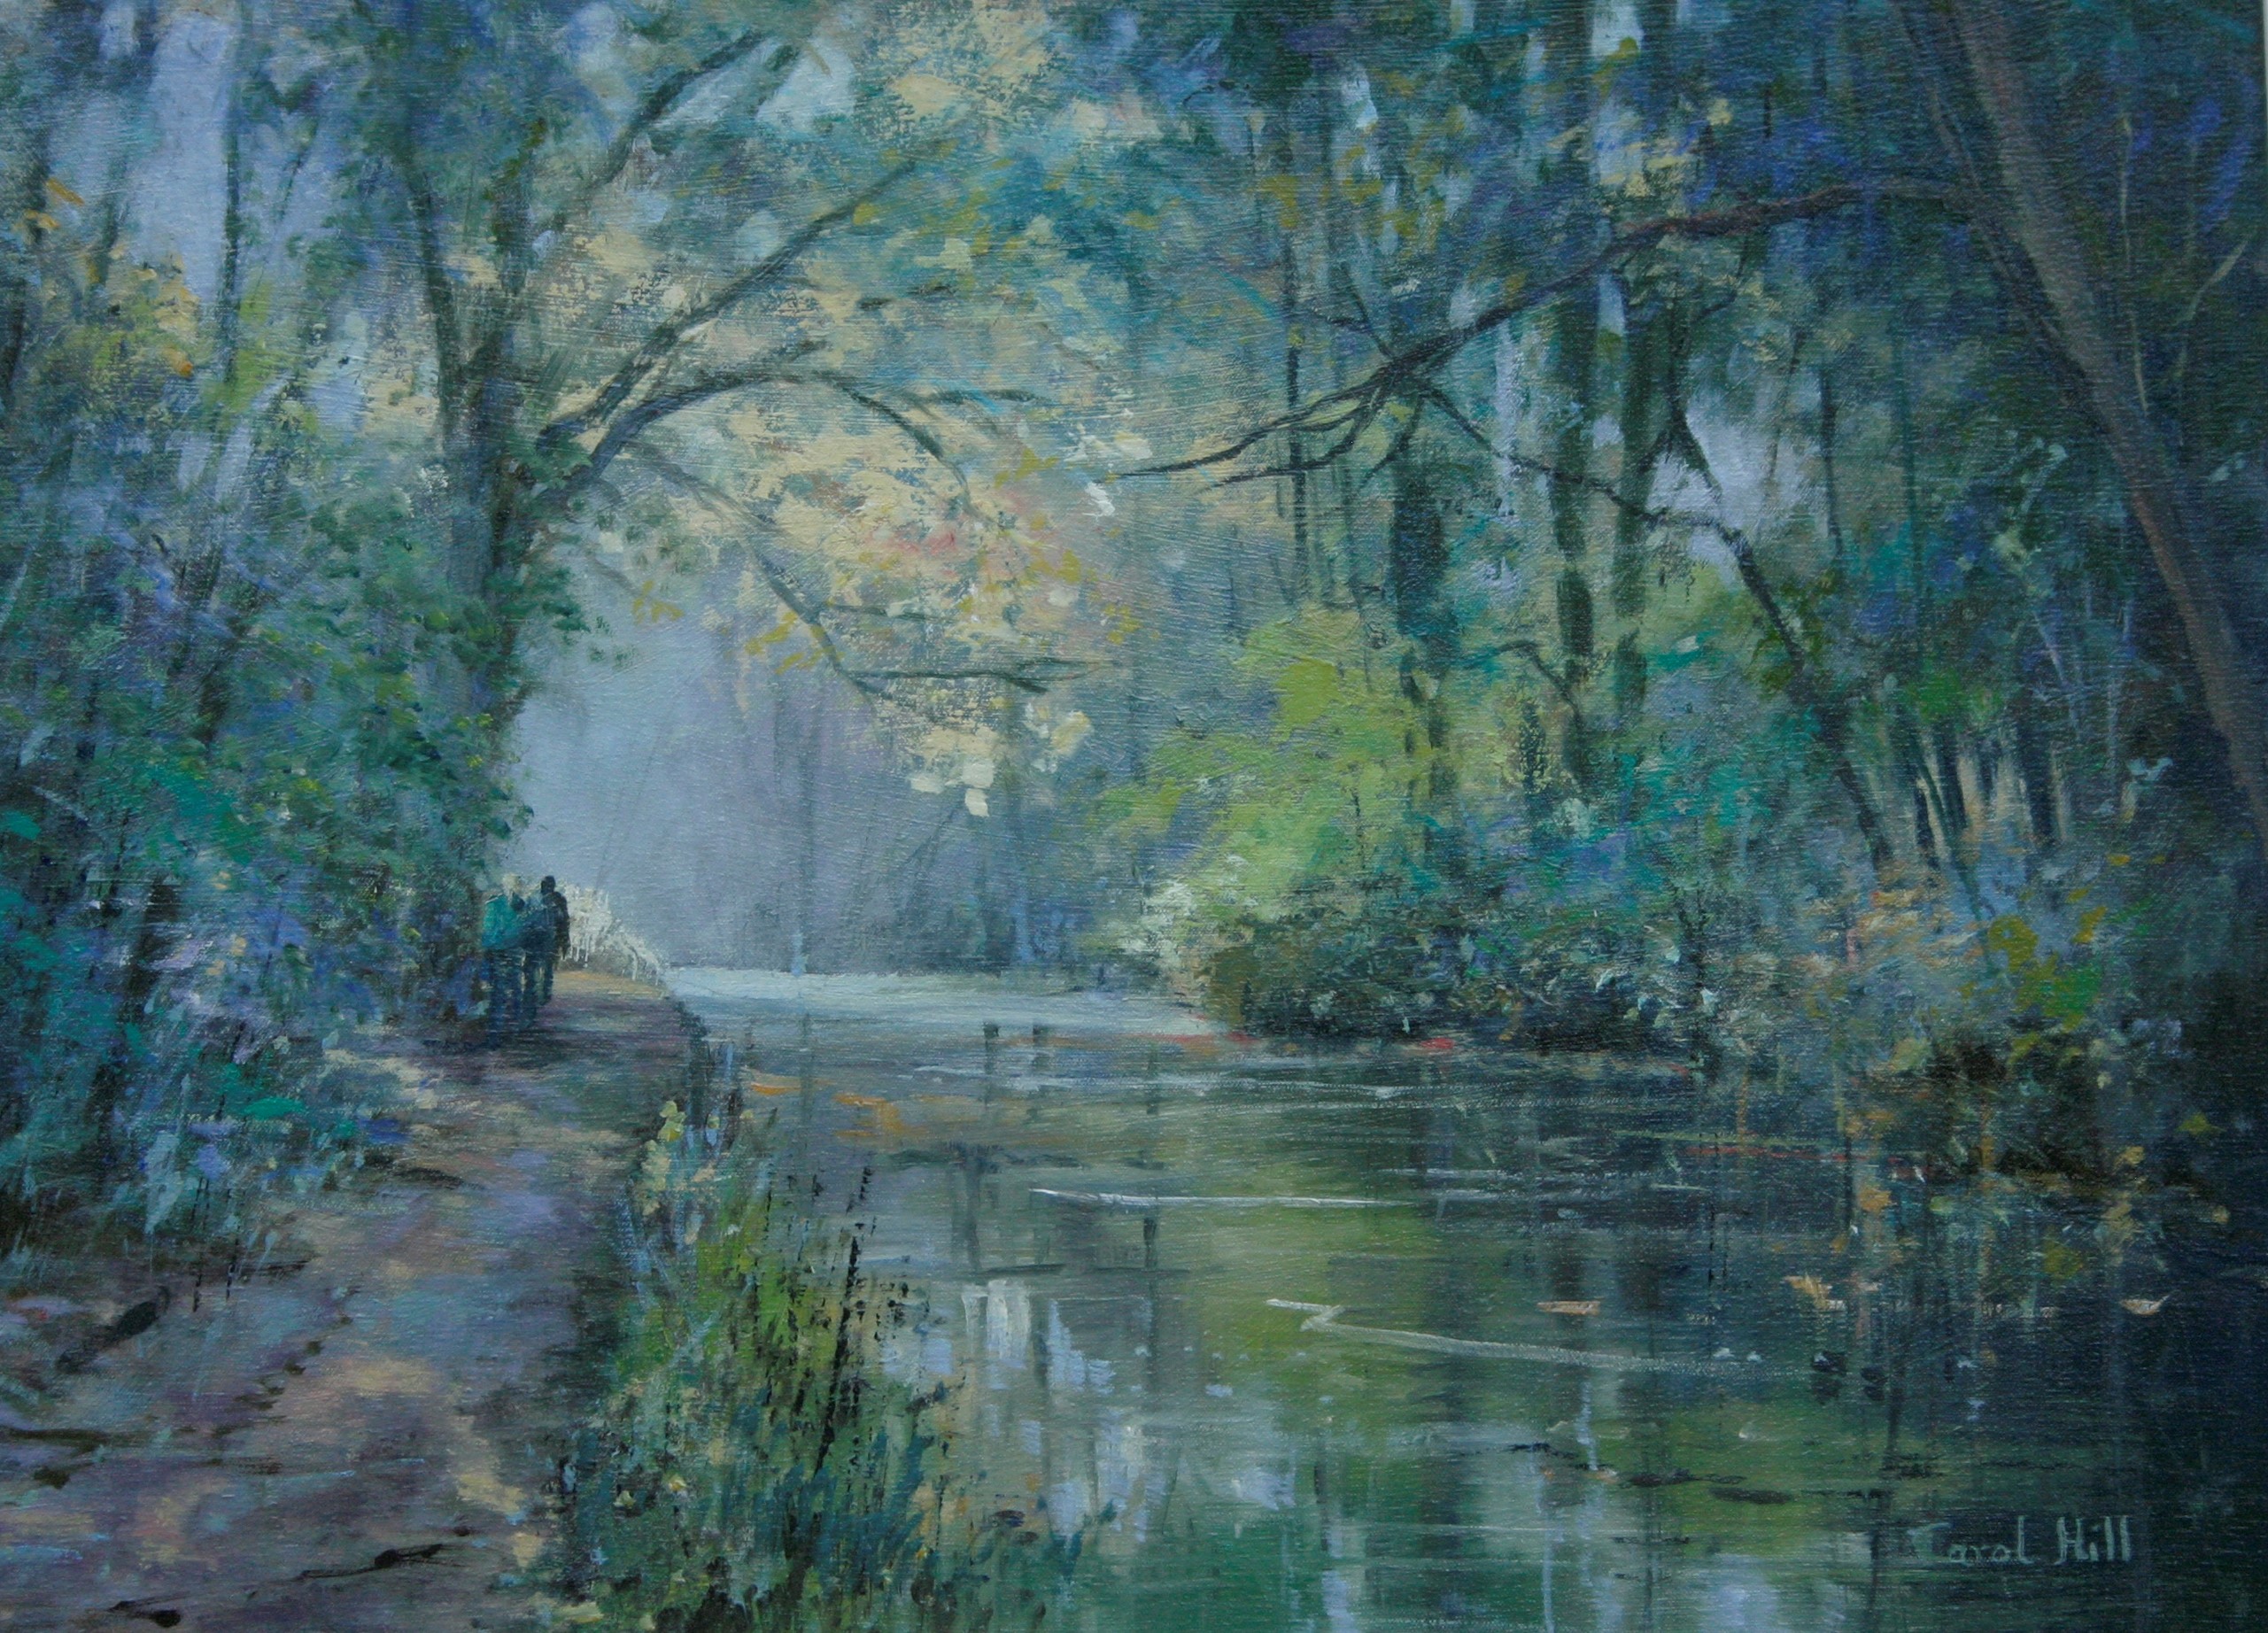 Painting of a river running through woods